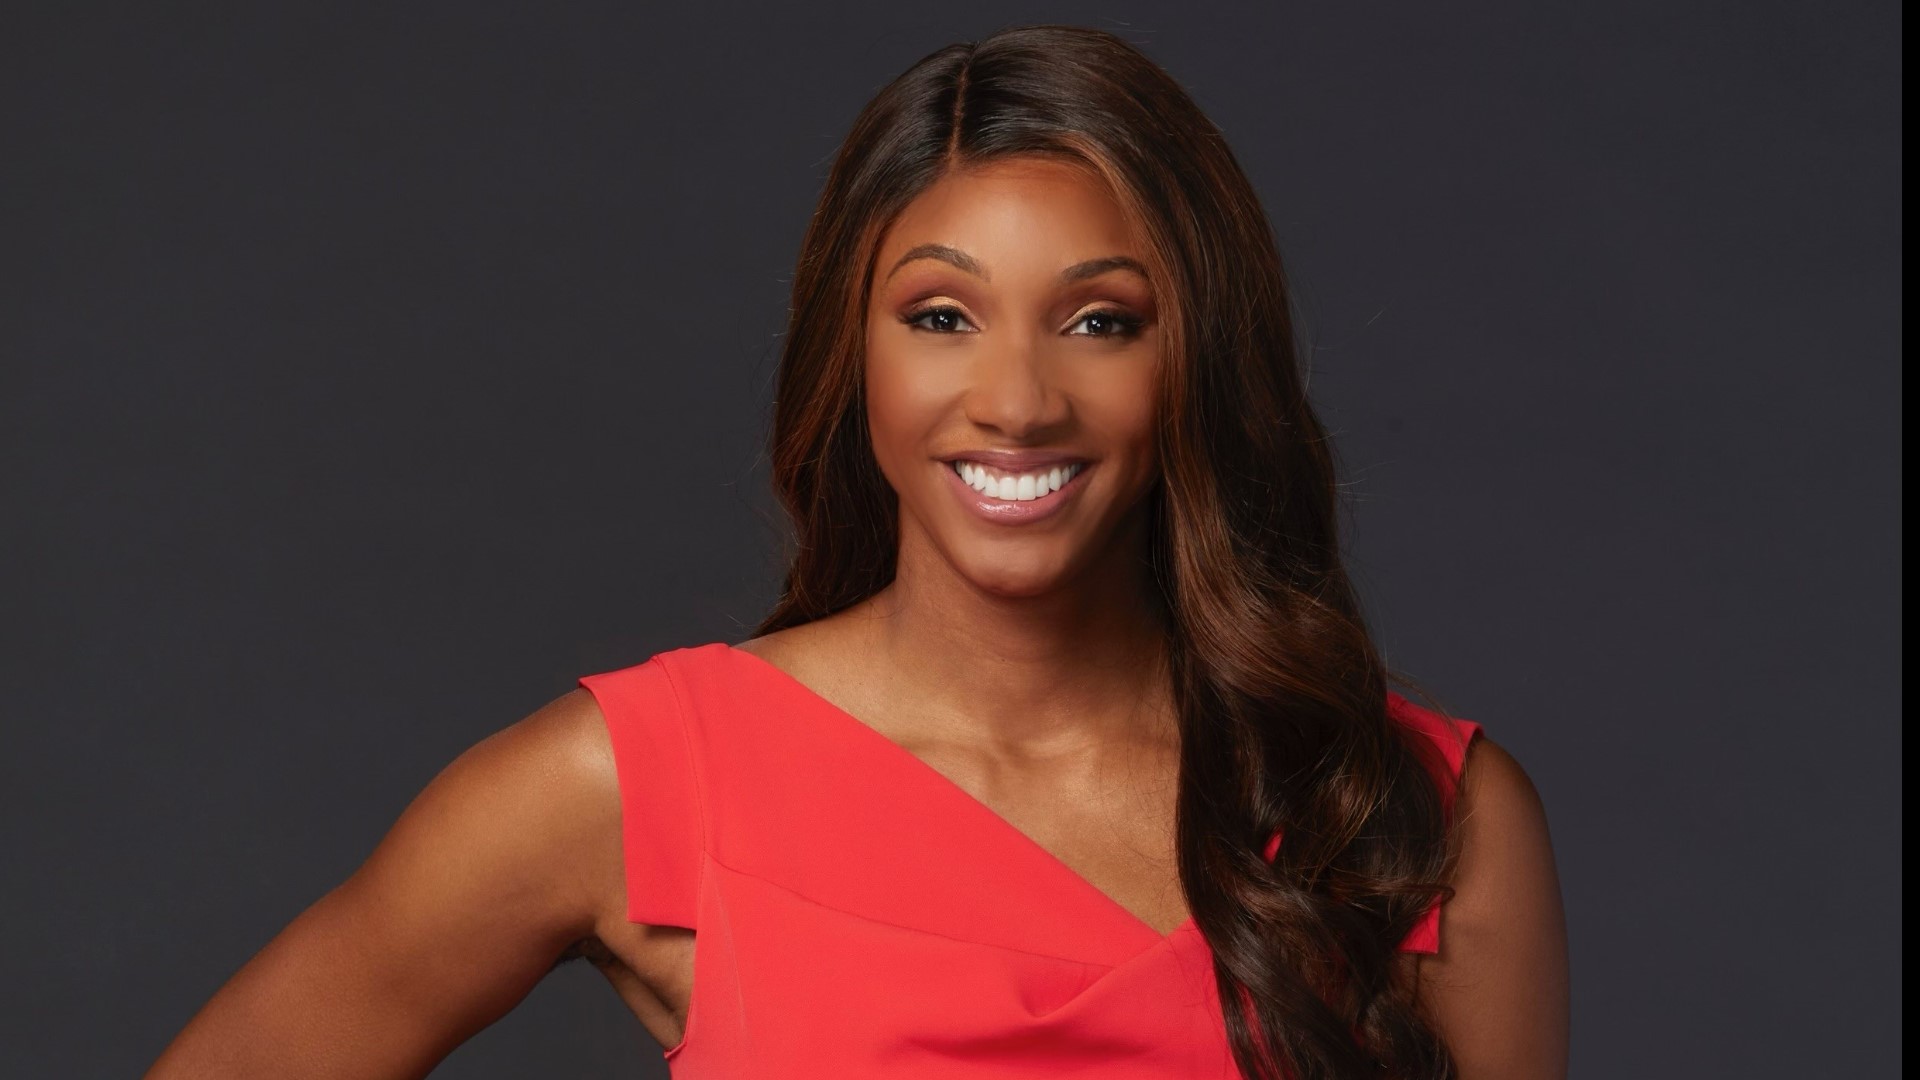 Maria Taylor of NBC Sports has been revealed as the host for the 2022 Greater Cleveland Sports Awards, which takes place at Rocket Mortgage FieldHouse on March 23.